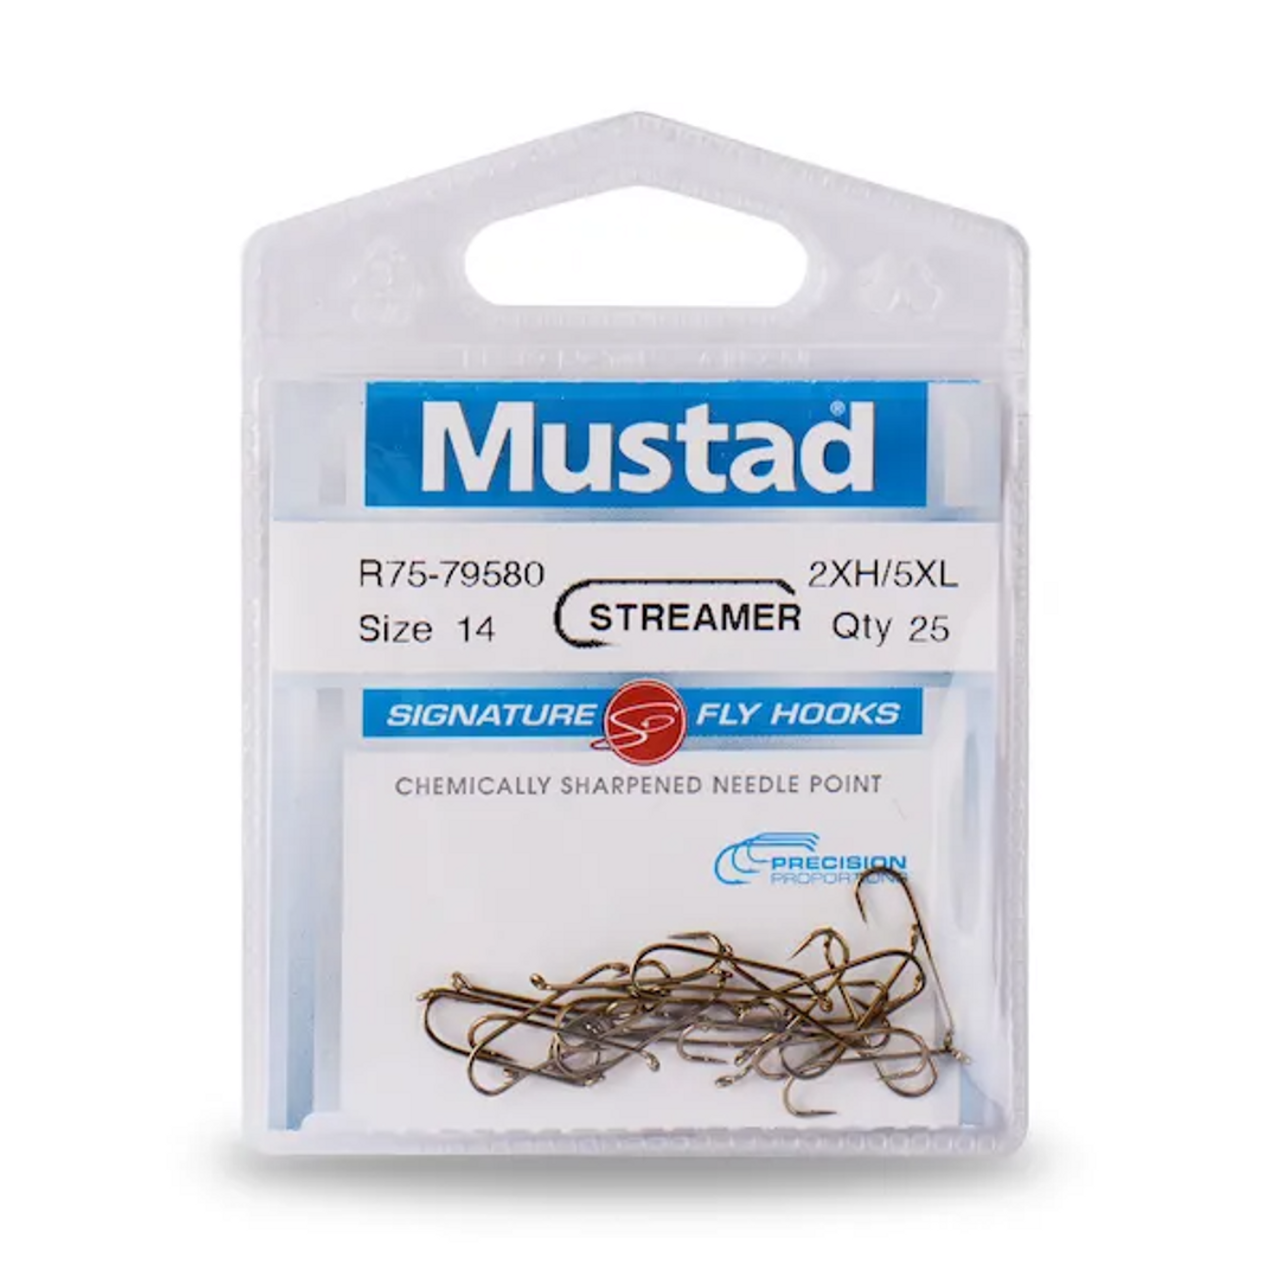 MUSTAD STREAMER SIGNATURE R74-9672 FLY HOOK - 4X LONG - FRED'S